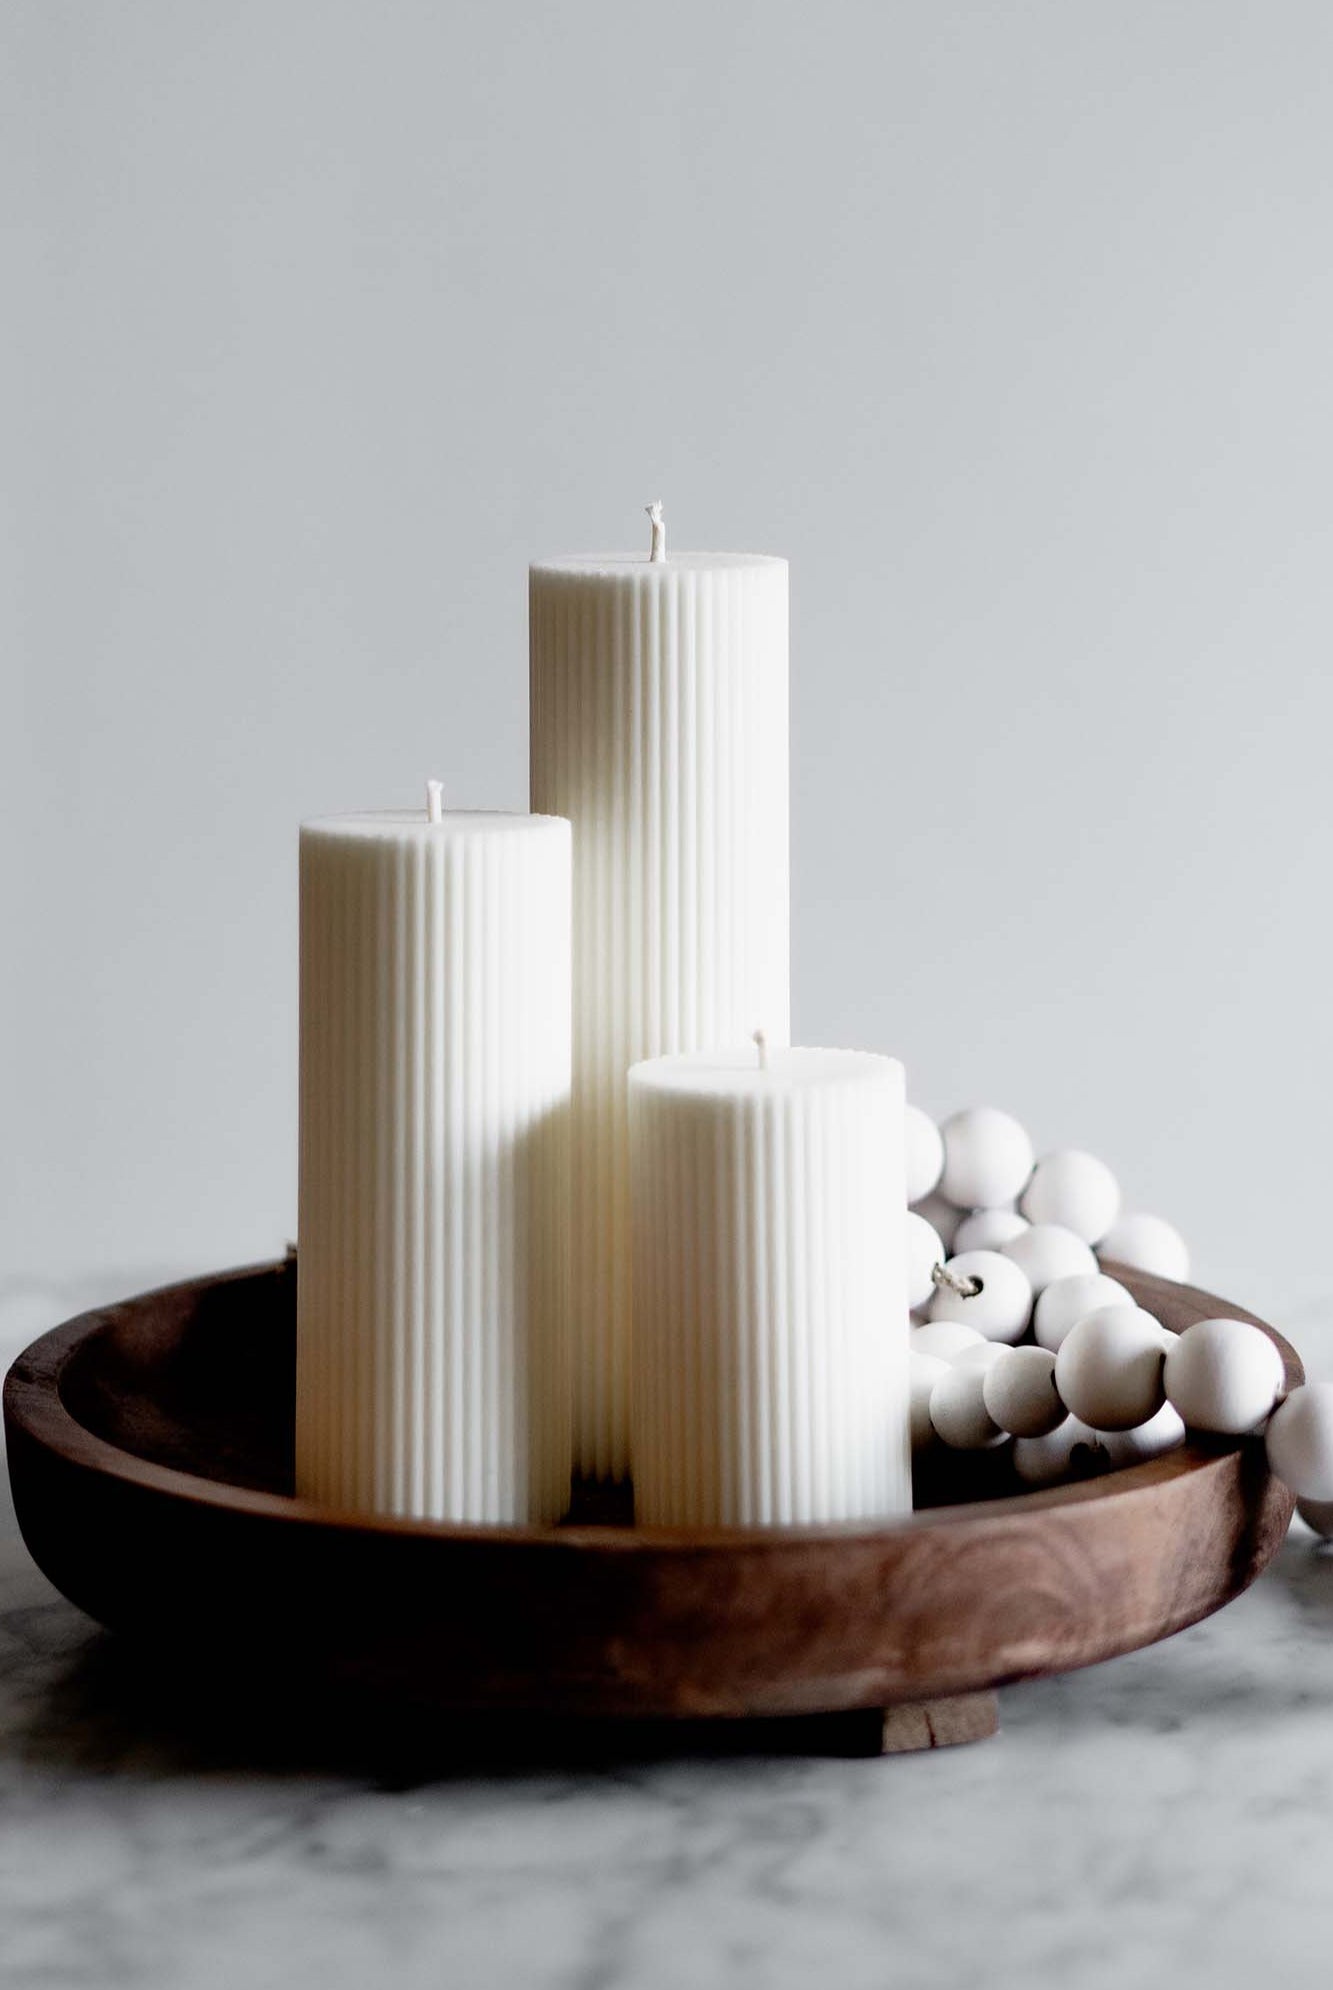 Ribbed Pillar Candle Moulds 1 - Silicone Mould, Mold for DIY Candles. Created using candle making kit with cotton candle wicks and candle colour chips. Using soy wax for pillar candles. Sold by Myka Candles Moulds Australia